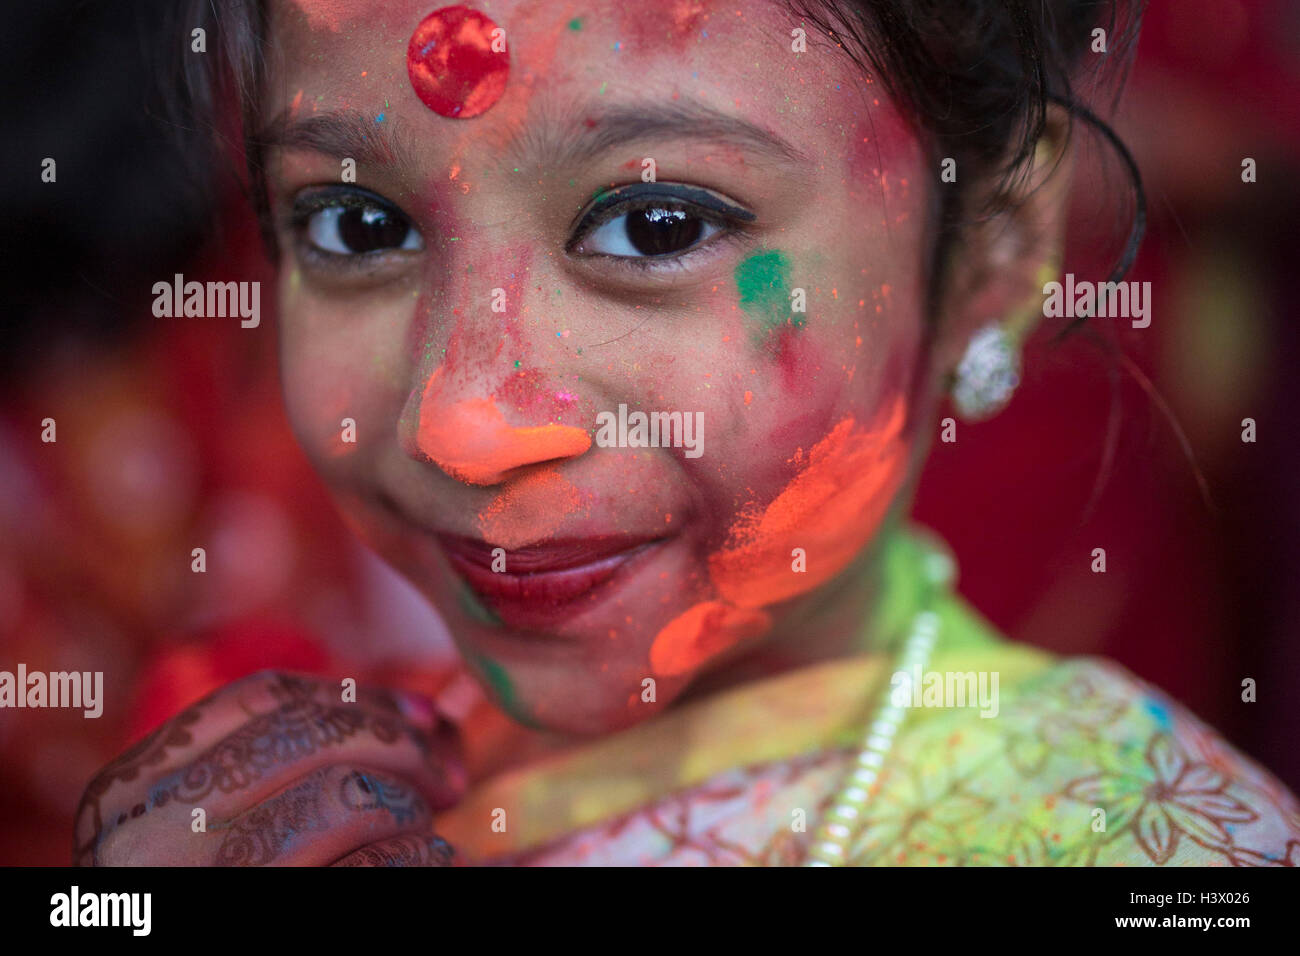 Dhaka, Bangladesh. 11th October, 2016. Bangladeshi Hindu devotees put vermillion and color on each other's faces as they dance on the final day of the Durga Puja Festival in Dhaka, Bangladesh, on October 11, 2016. The five-day Durga Puja festival commemorates the slaying of a demon king Mahishasur by Hindu goddess Durga, marking the triumph of good over evil. Credit:  zakir hossain chowdhury zakir/Alamy Live News Stock Photo